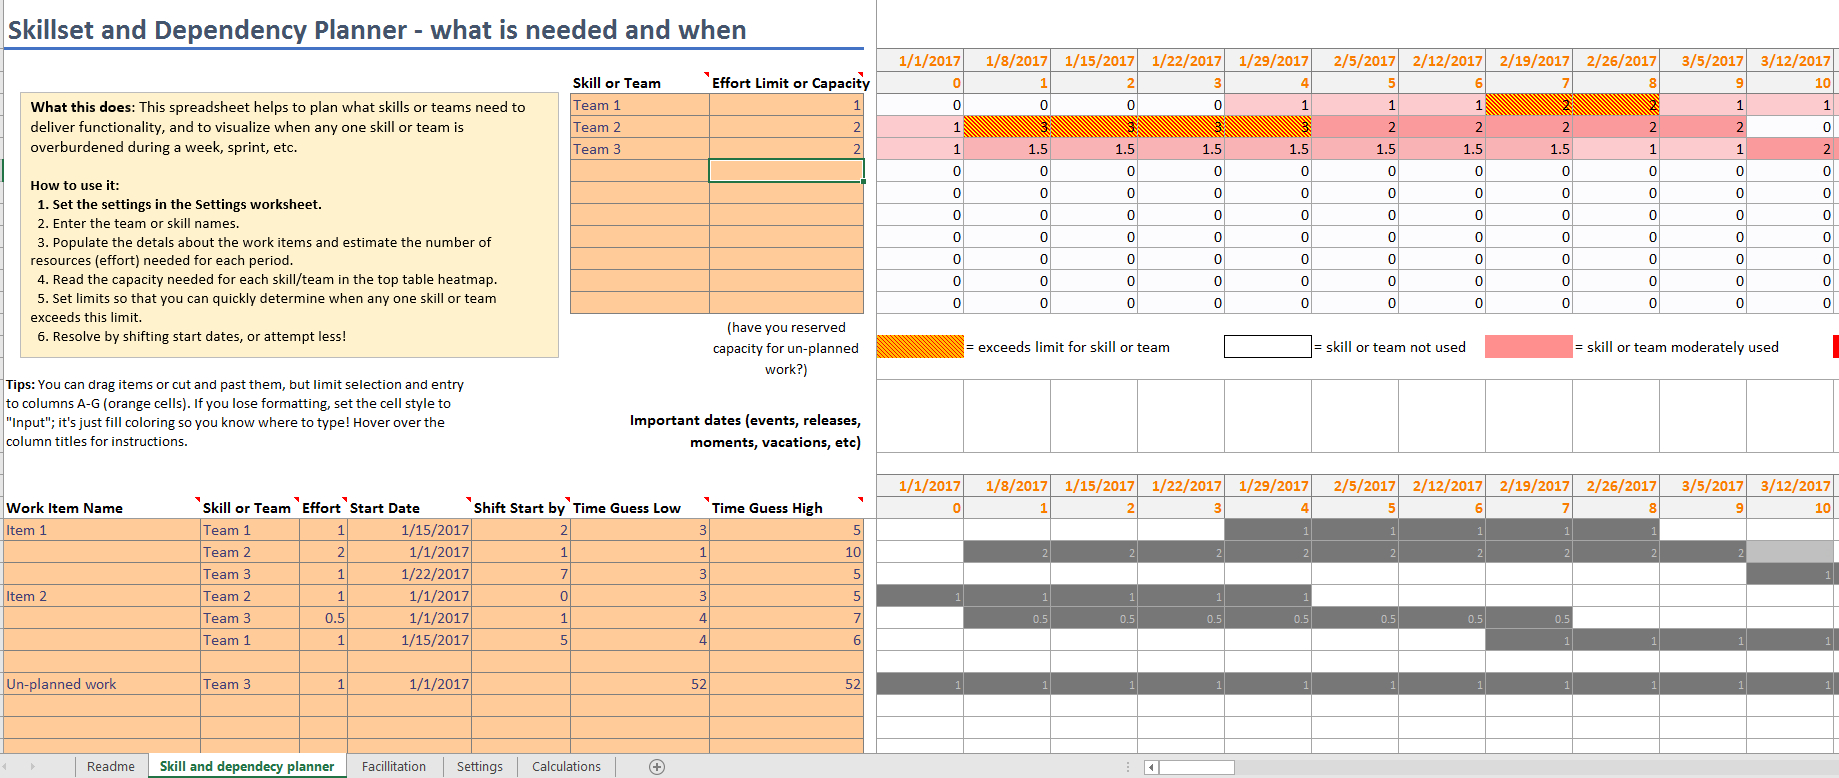 Capacity Planning Spreadsheet For Dependency And Skill Capacity Planning Portfolio Planning